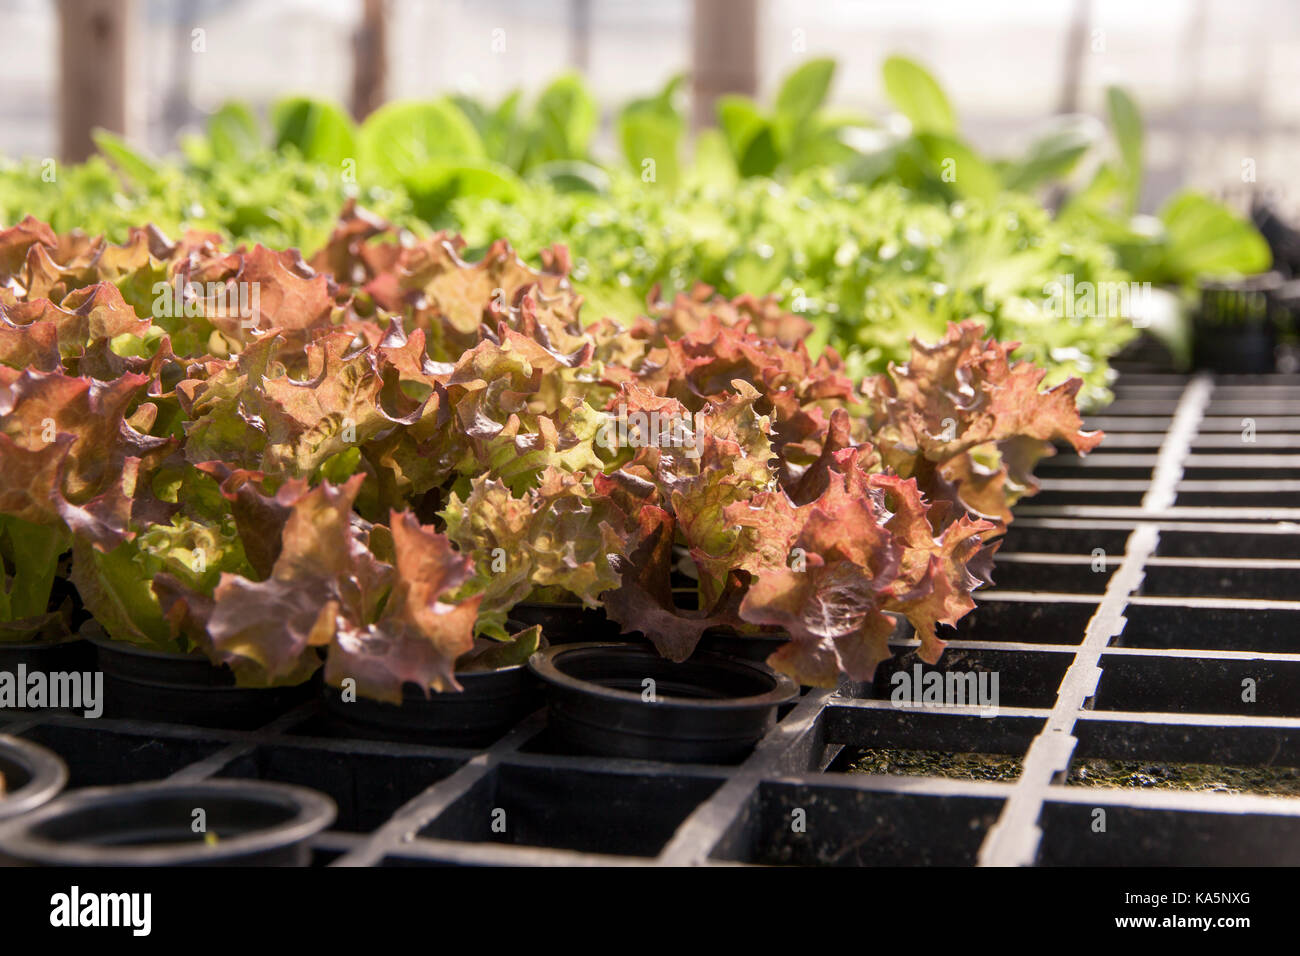 Organic hydroponic lettuce cultivation farm. Red lettuce and green lettuce. Stock Photo